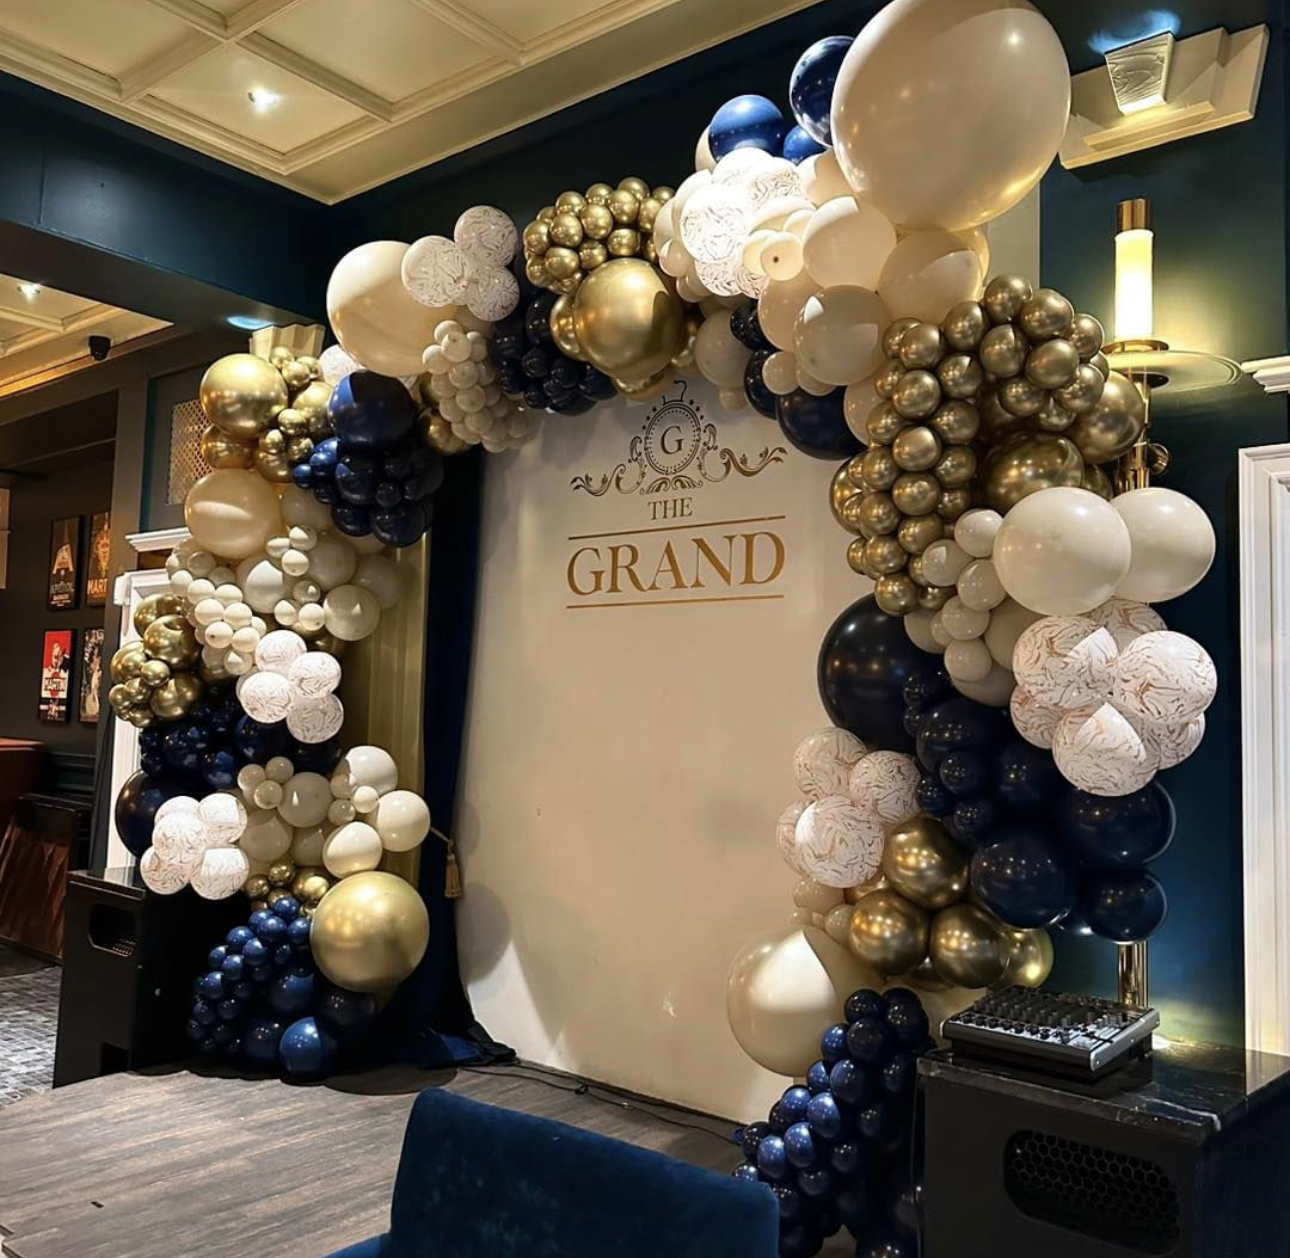 The Grand can be hired for private events and celebrations